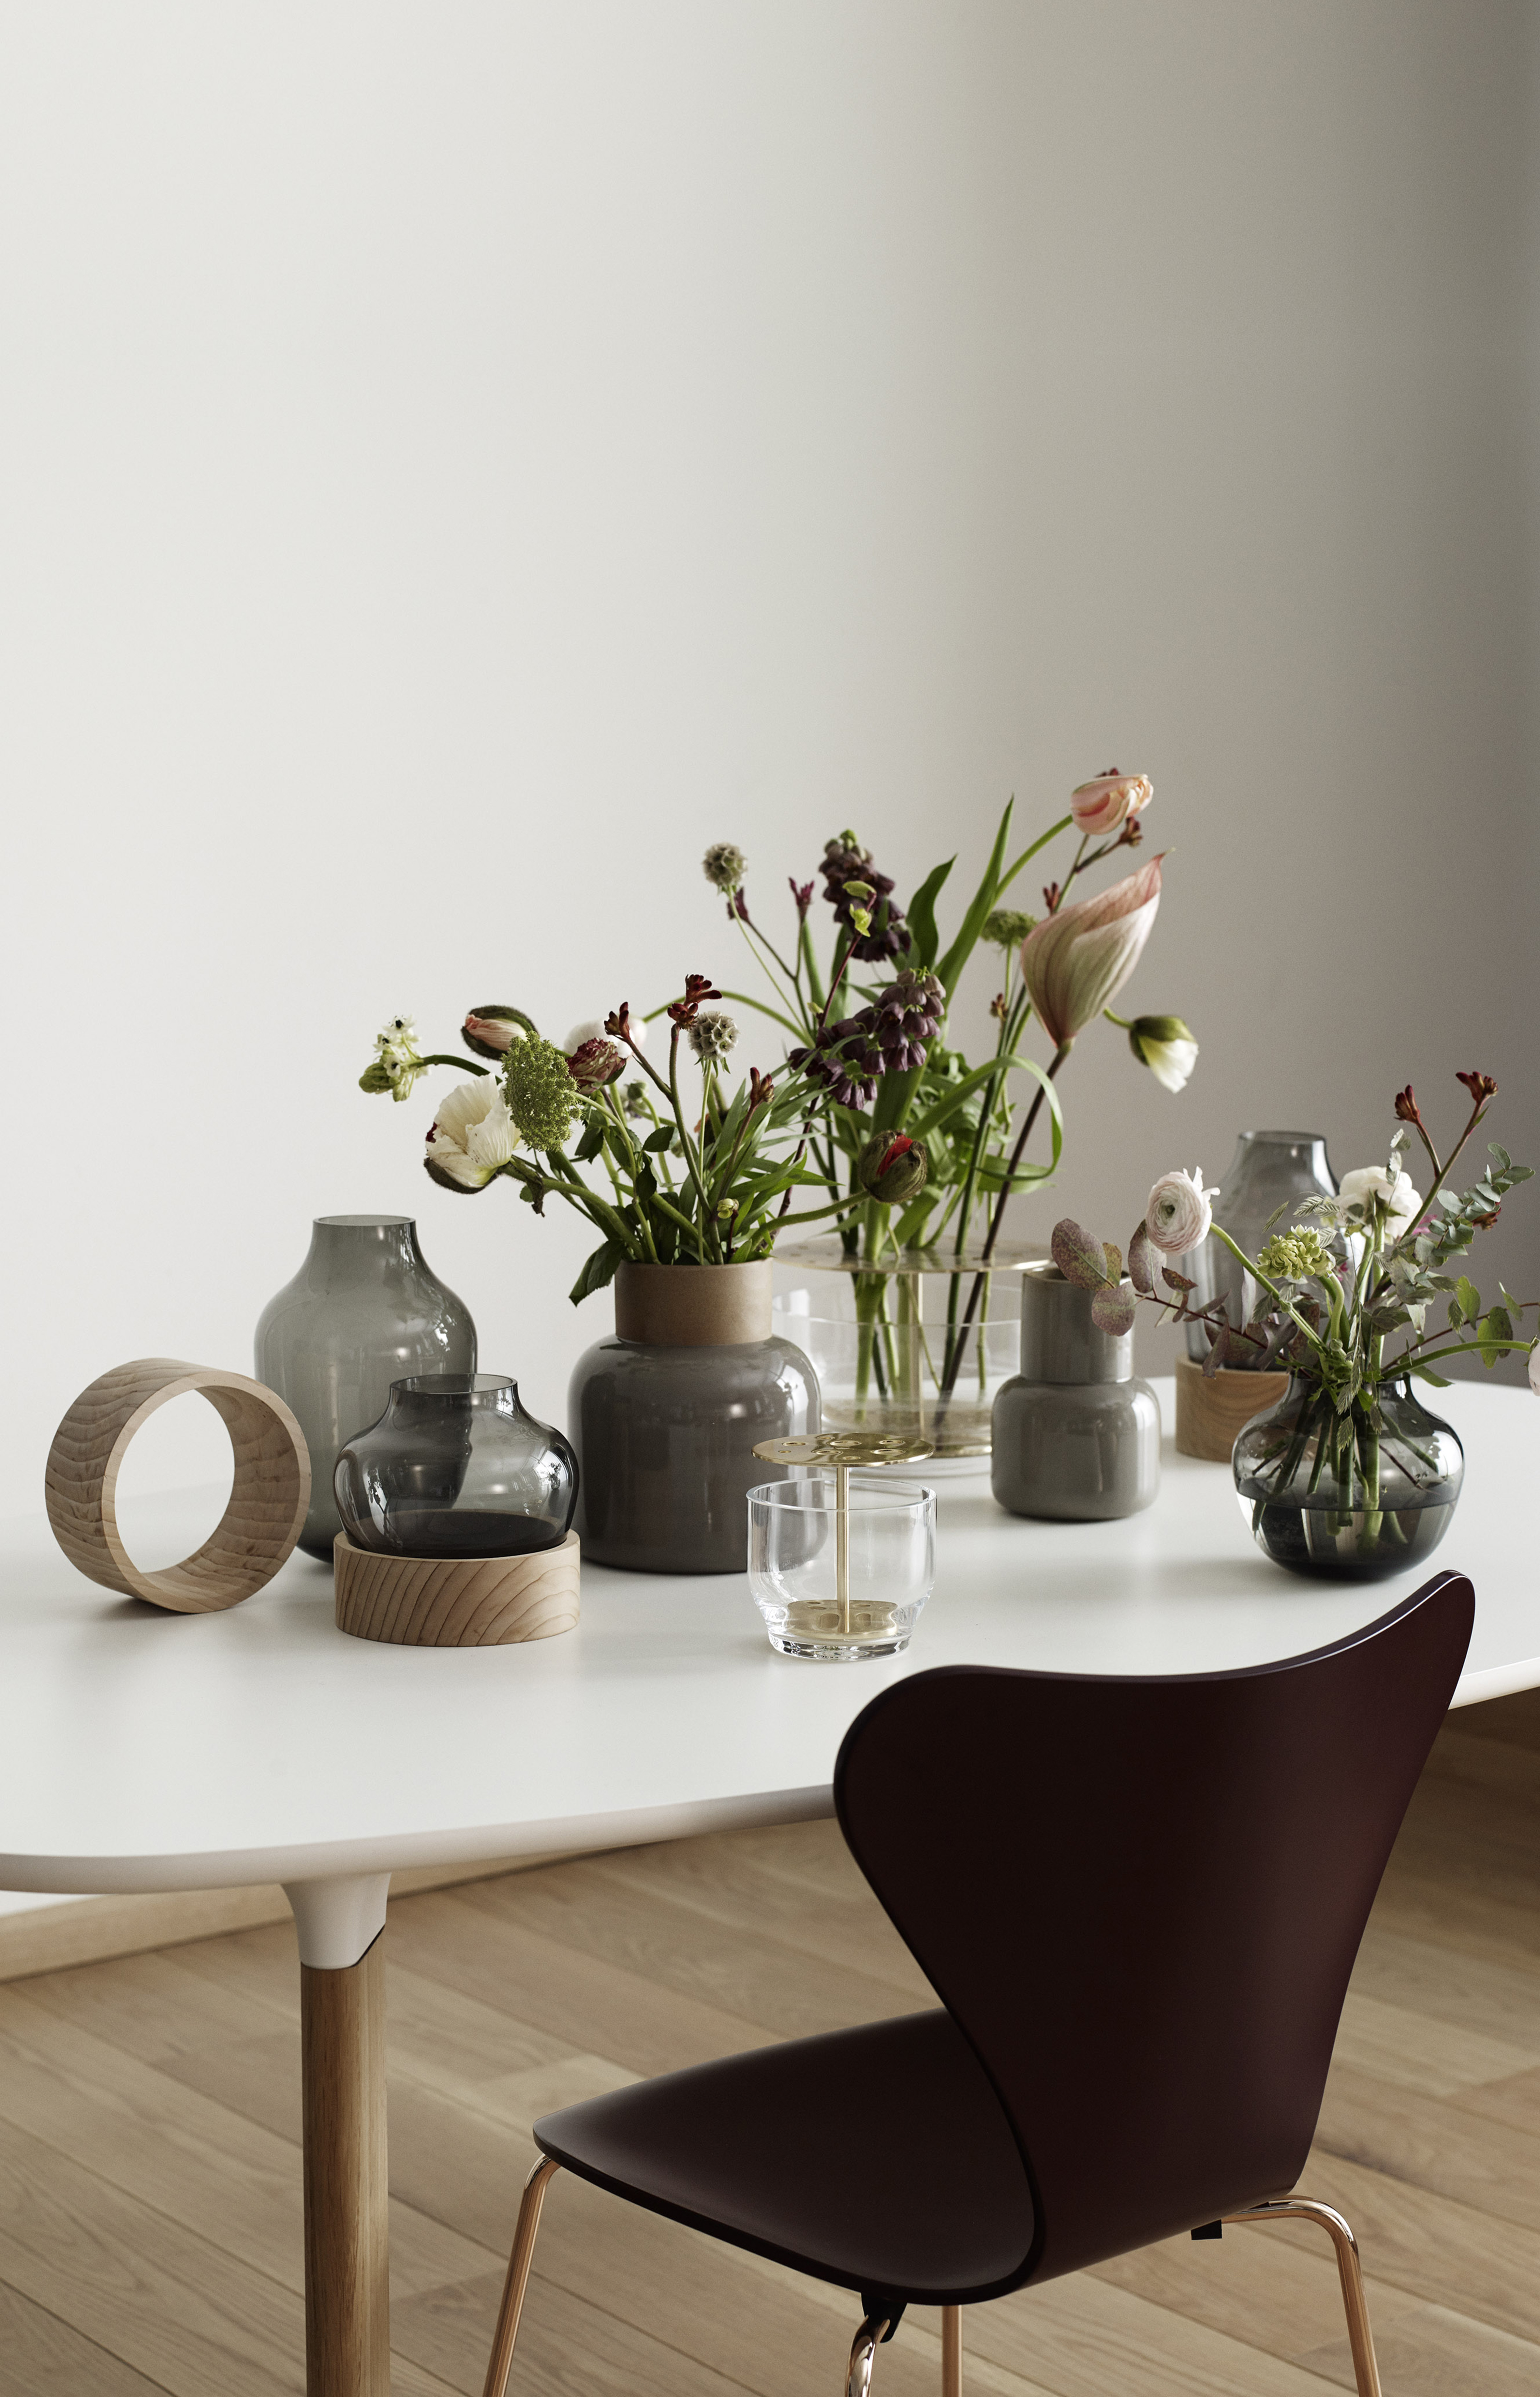 Whether for a special occasion or just because you love blooms, flowers are an easy way to add colour, scent and style into your space. Check out these 9 flower styling ideas are amongst the prettiest you'll have seen by Interior Stylist Maxine Brady. Modern flower arrangement